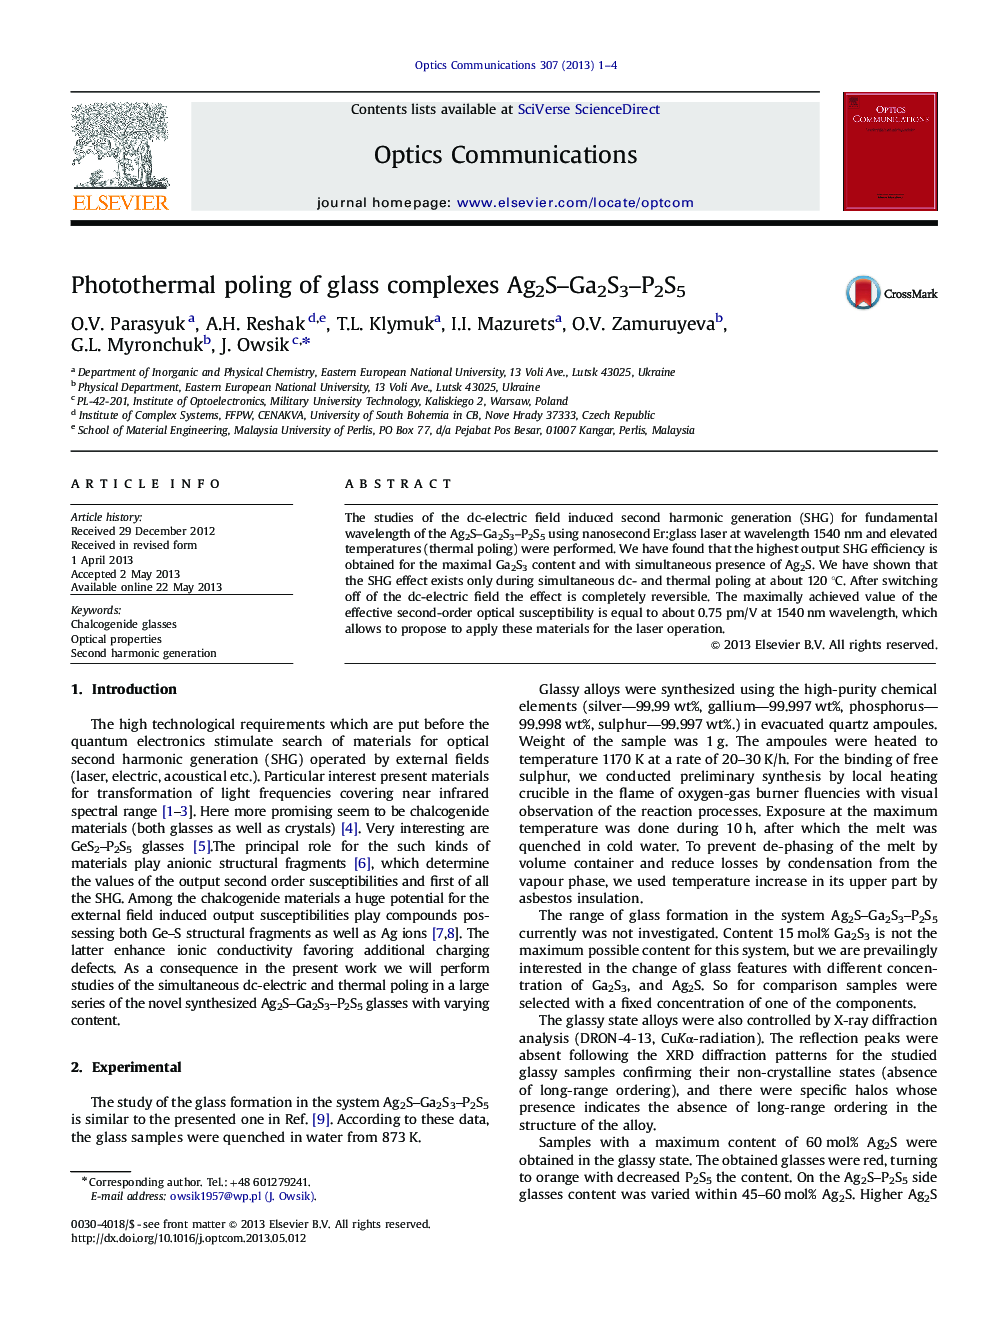 Photothermal poling of glass complexes Ag2S-Ga2S3-P2S5